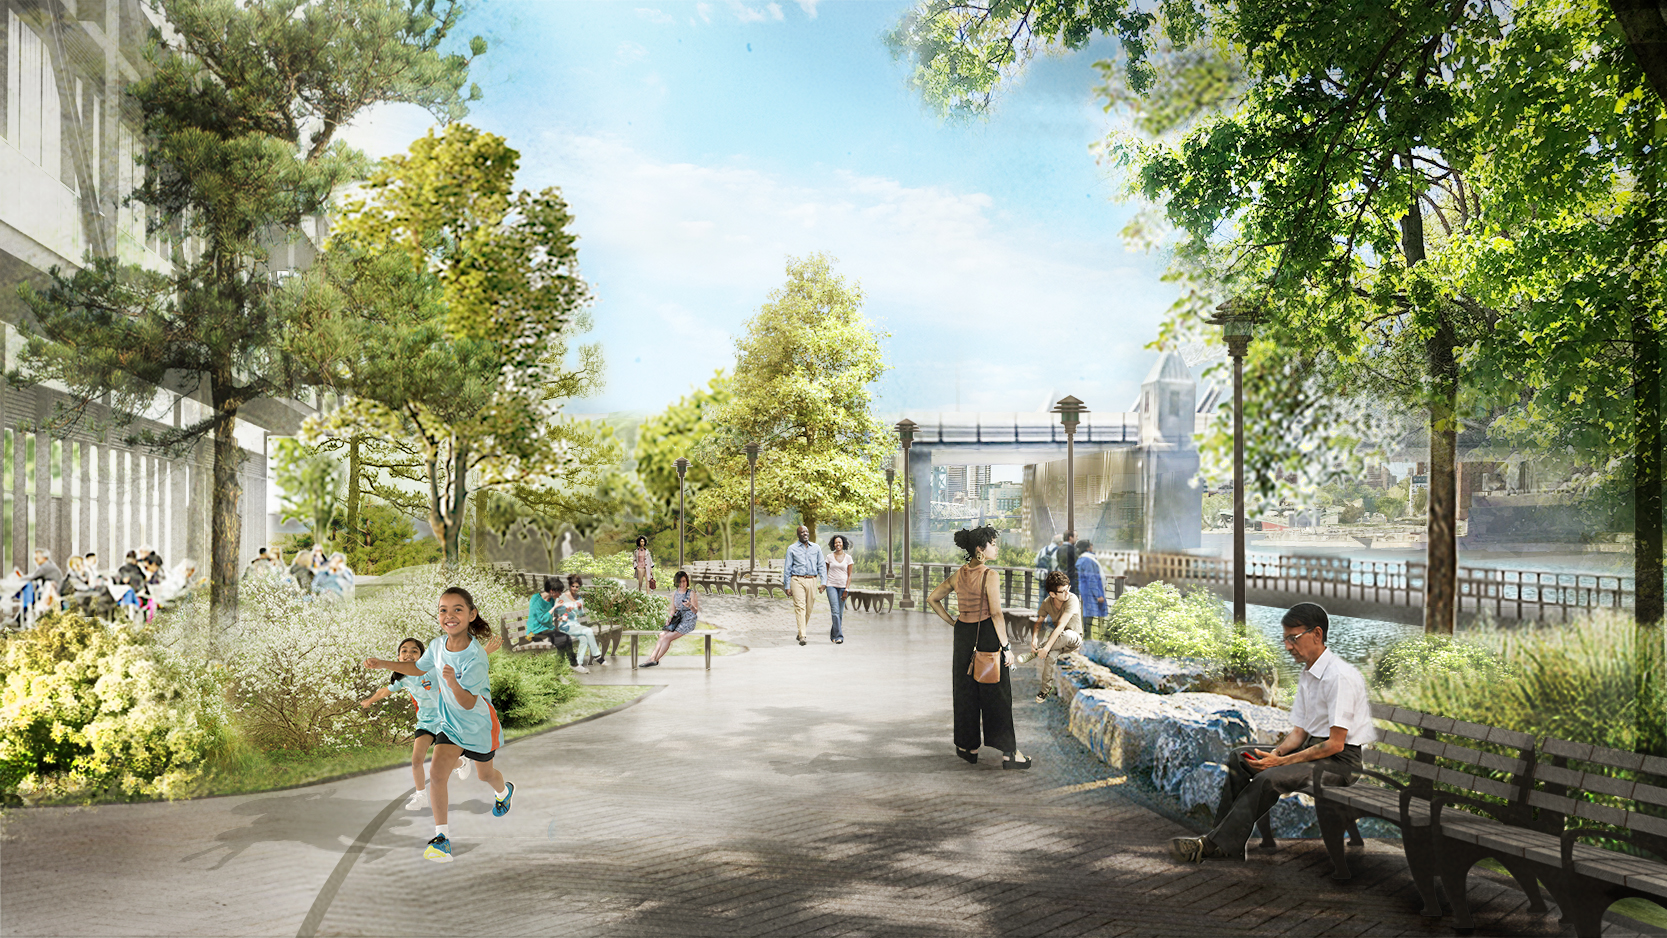 illustration of people enjoying an urban green space, one of the 2020 Awards for Excellence in Design winners